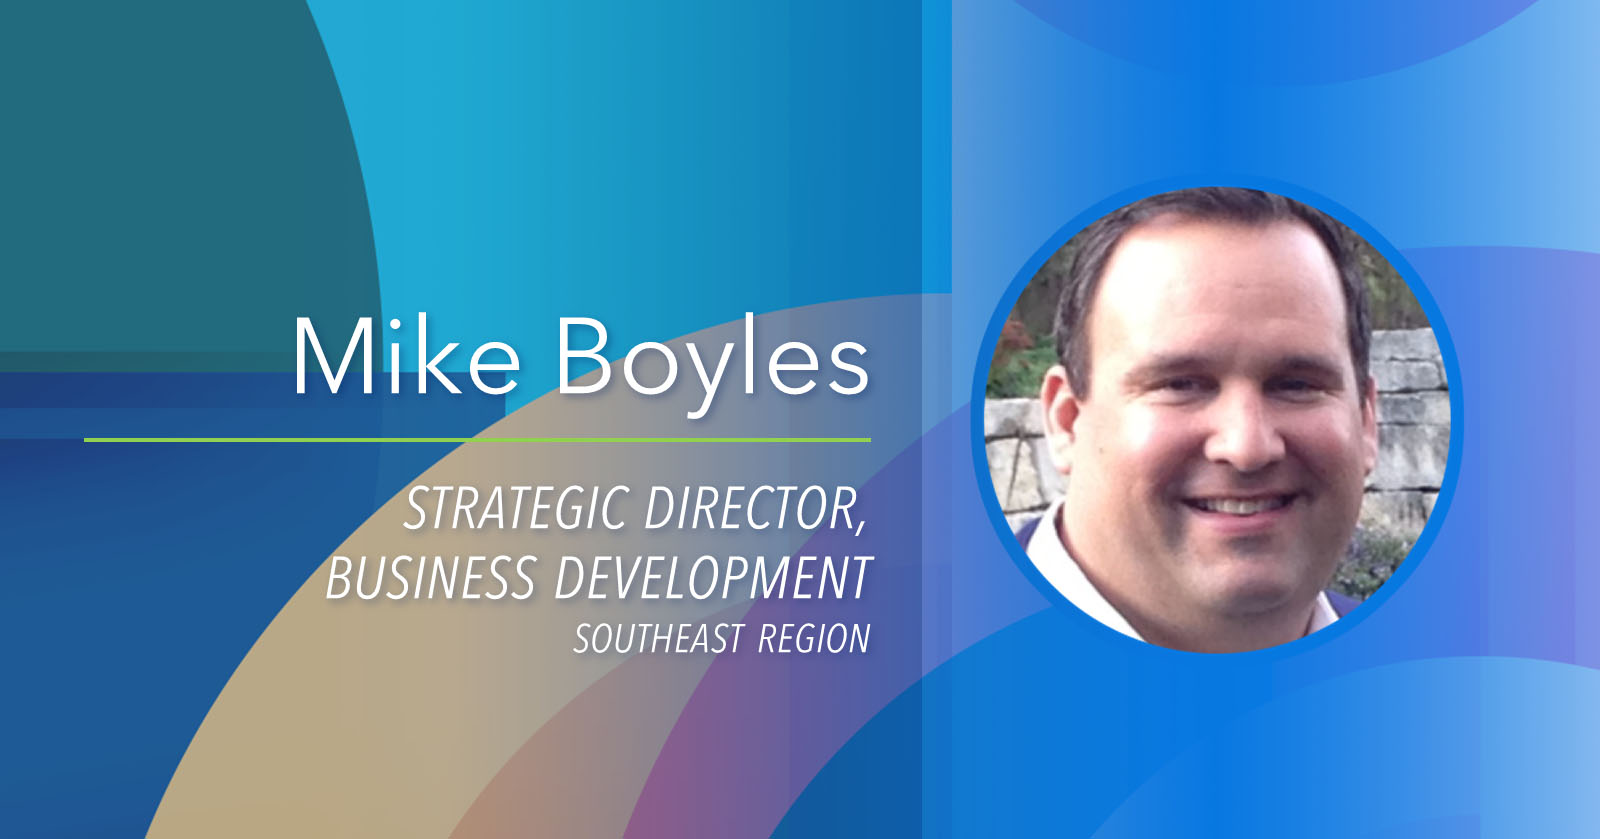 Mike Boyles Joins Empyrean Benefit Solutions, Inc. as Strategic Director of Business Development, Southeast Region